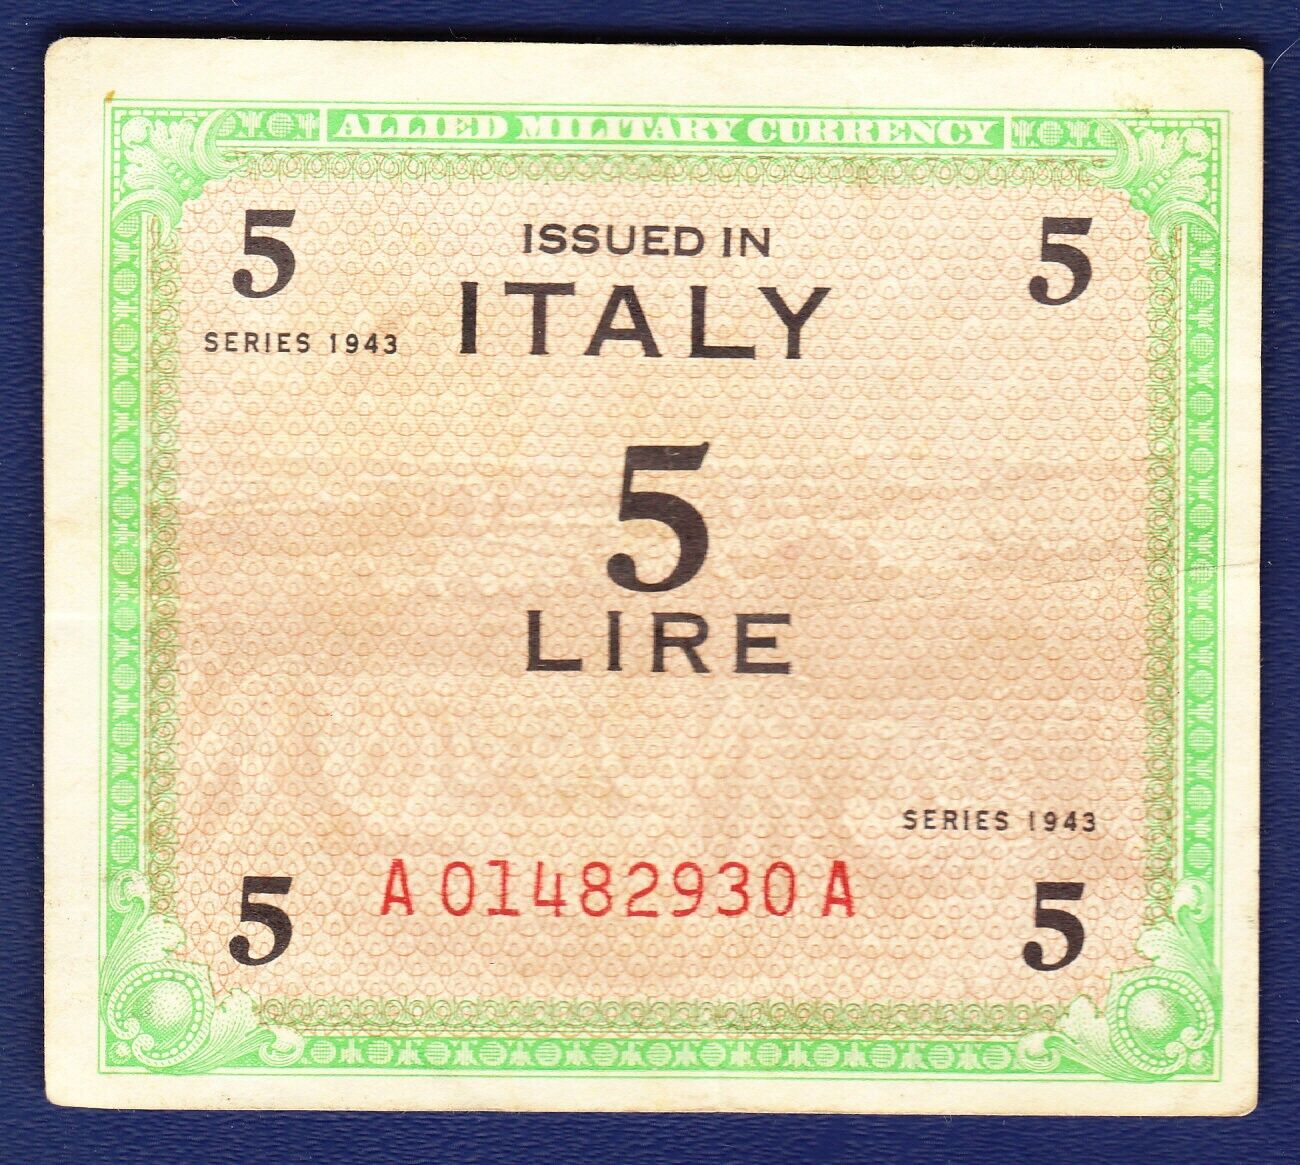 1943 ALLIED MILITARY CURRENCY ITALY 5 LIRE NOTE IN FINE CONDITION (P-M12b)